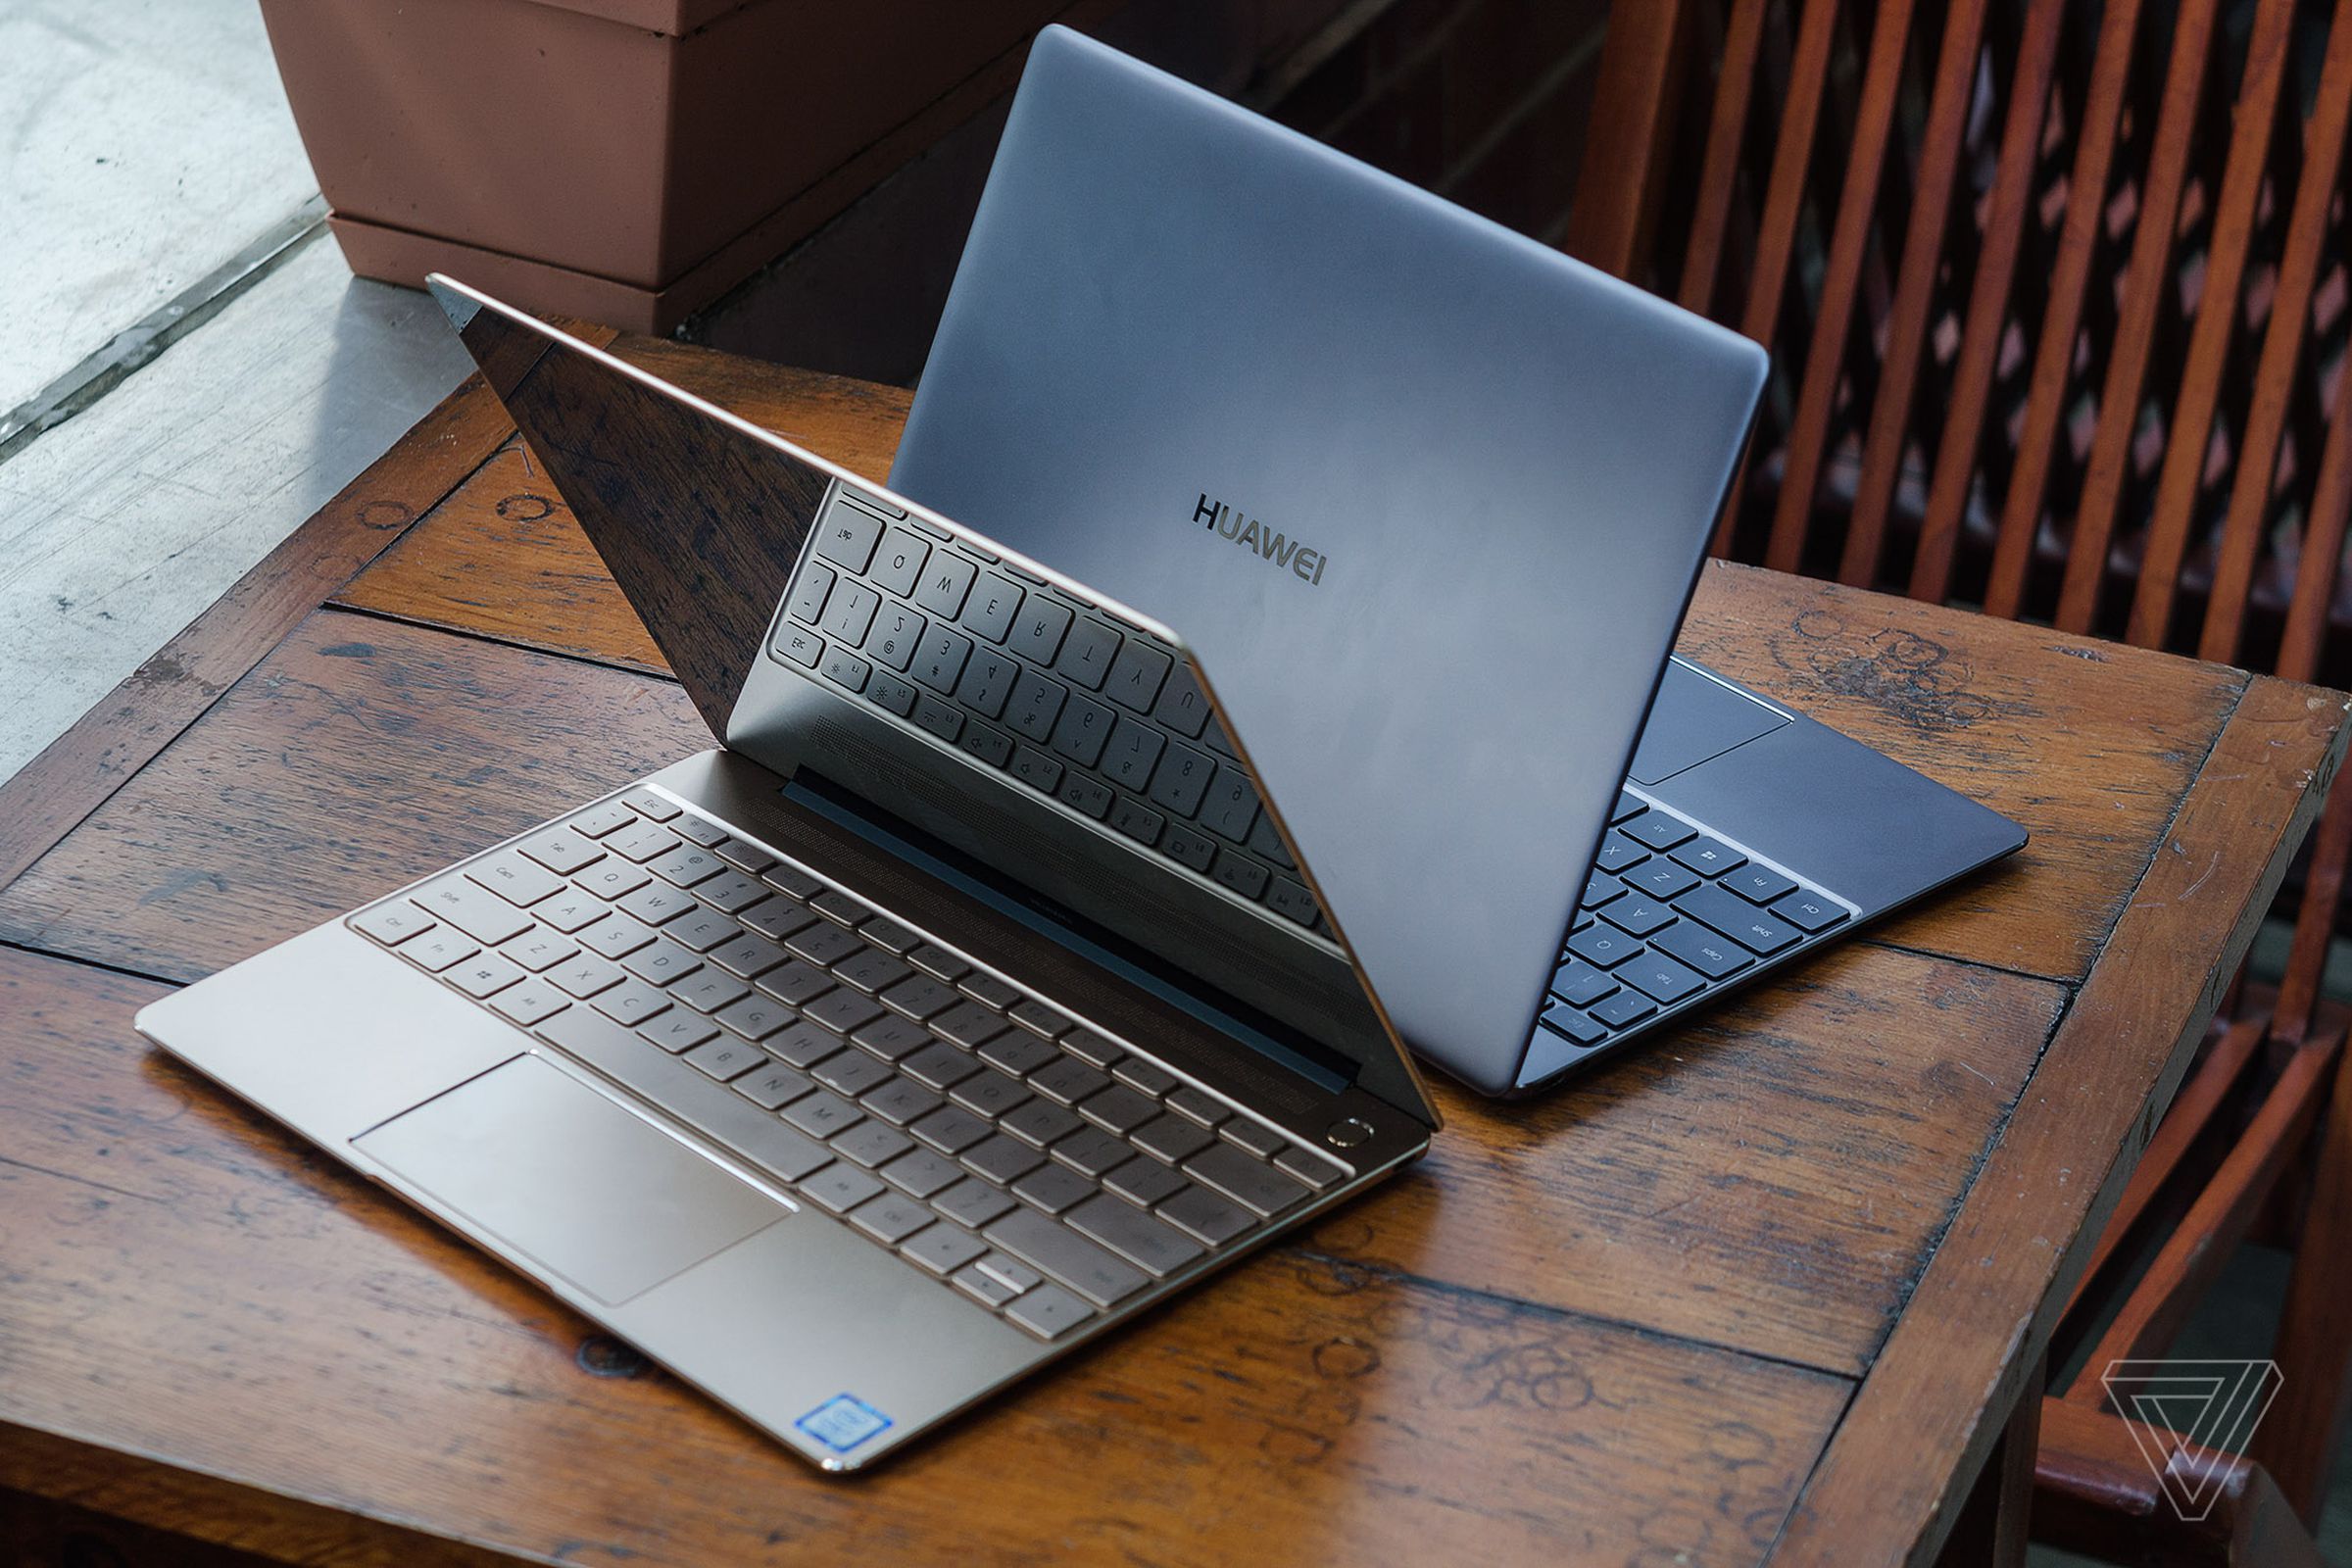 The Huawei Matebook X is the first laptop with Dolby-designed speakers